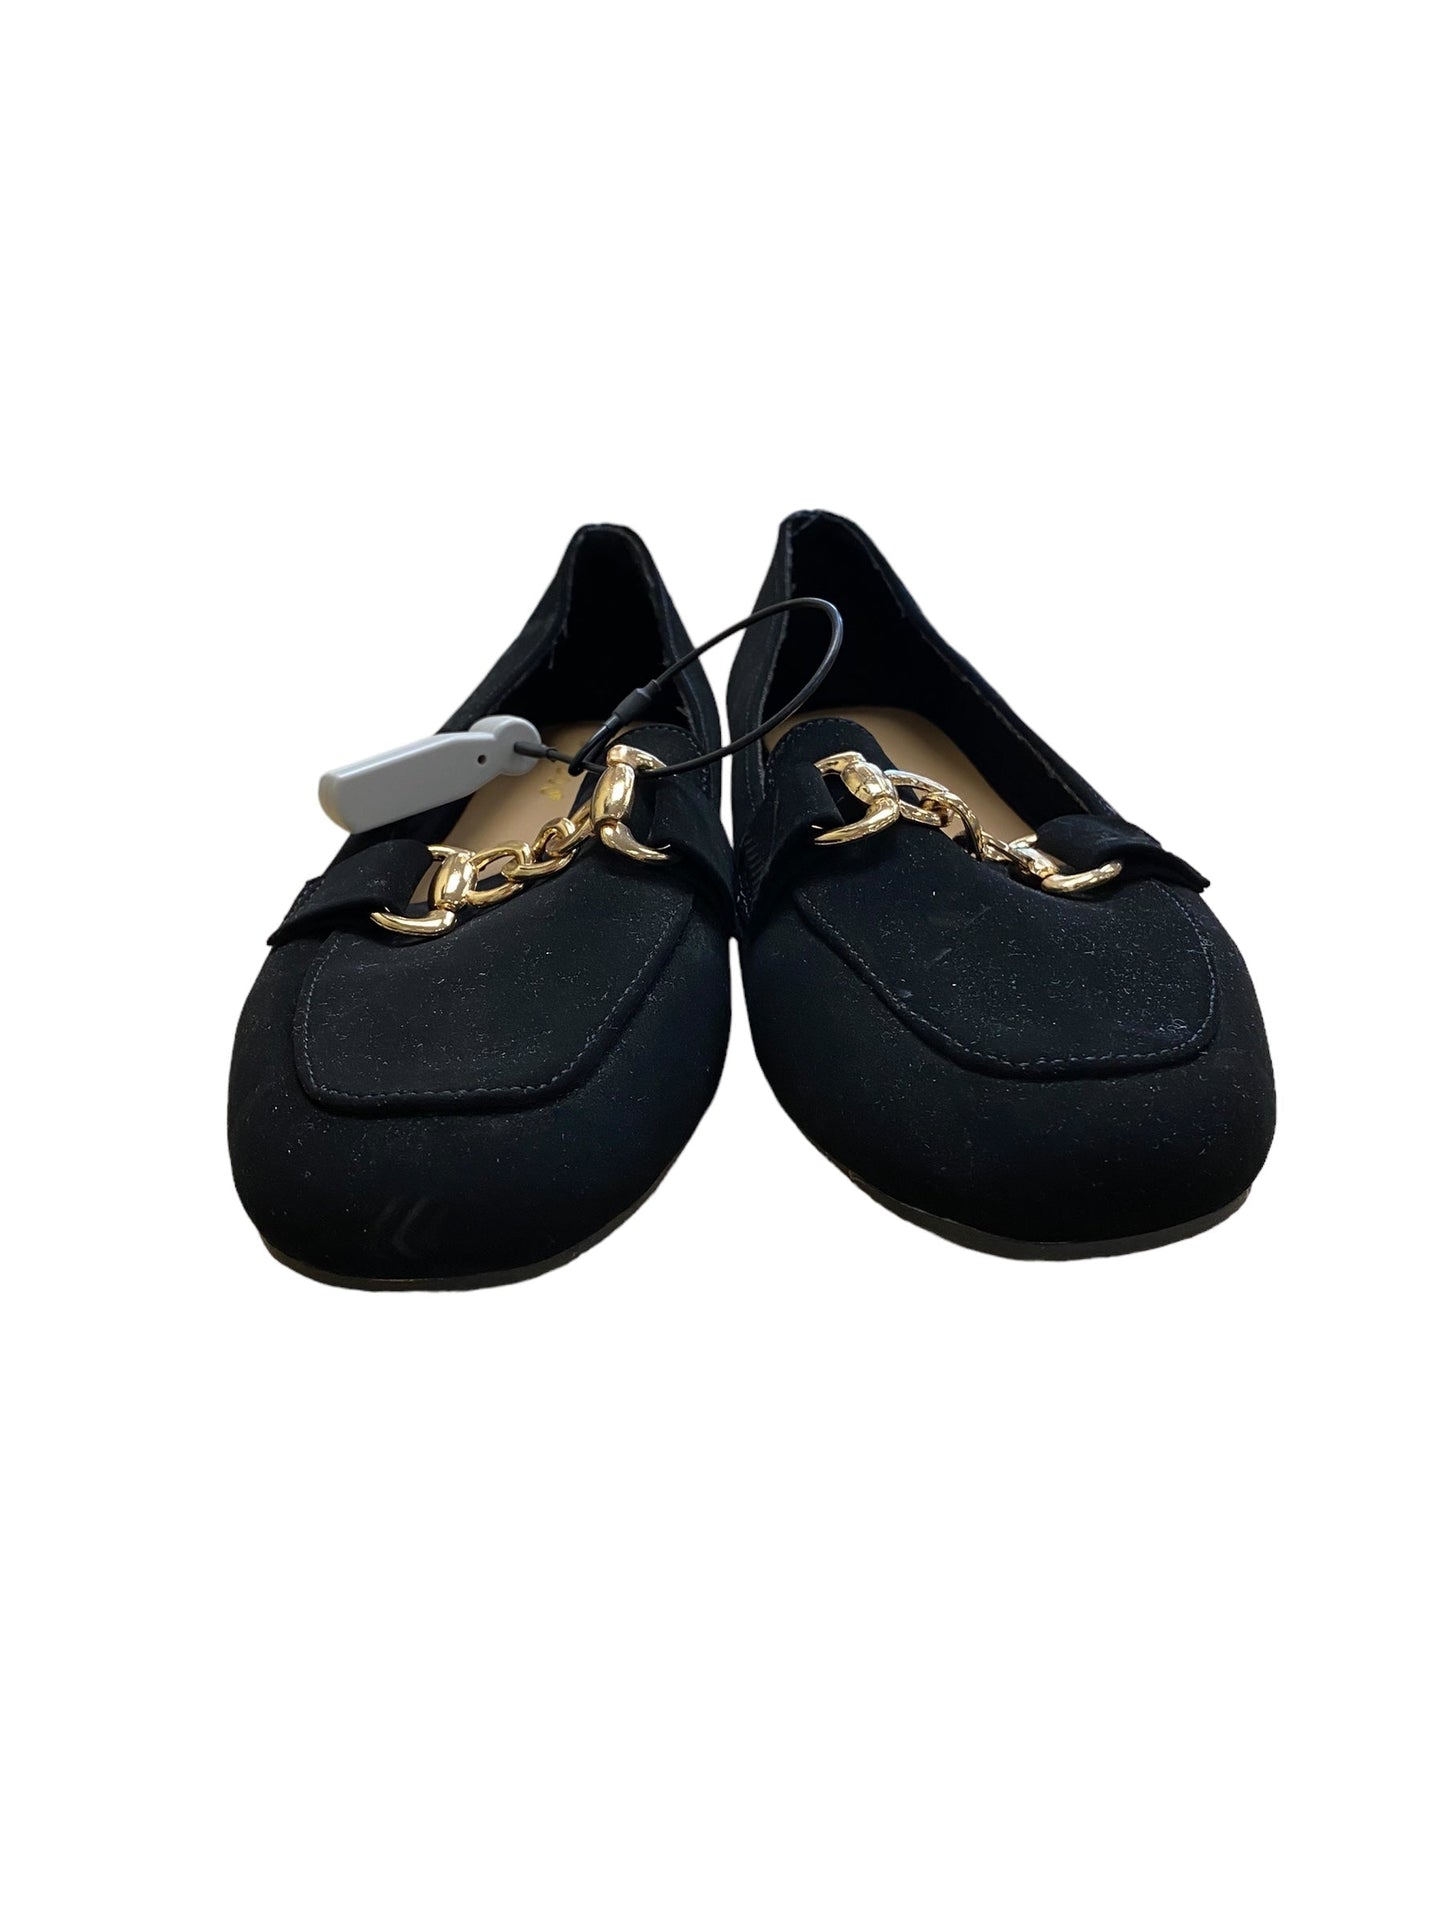 Black & Gold Shoes Flats Bamboo, Size 8